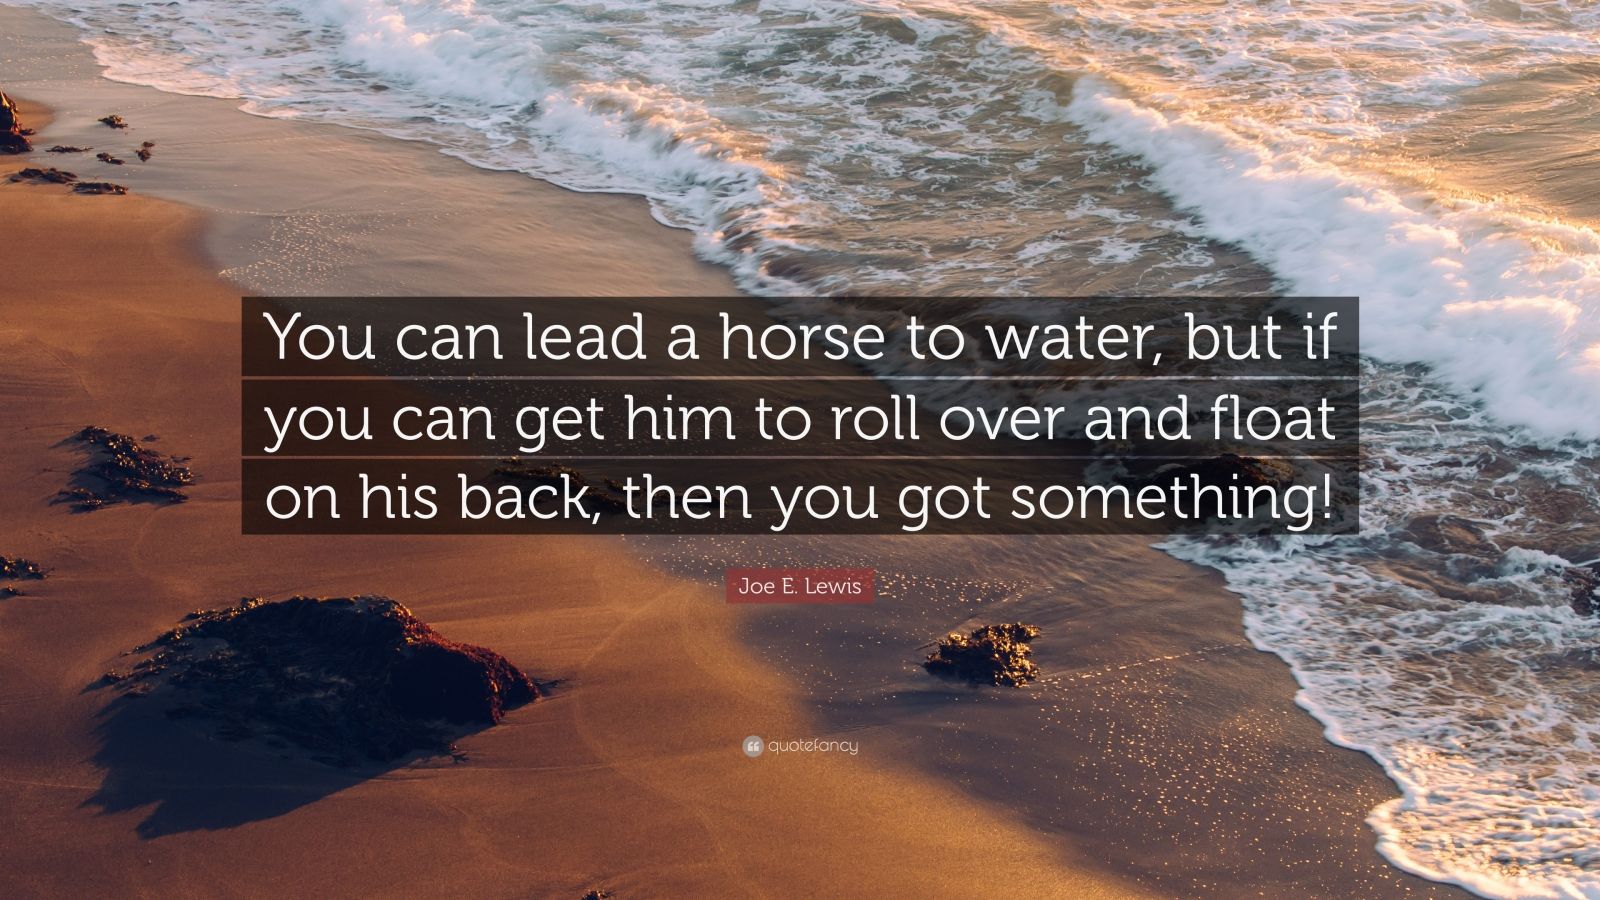 Joe E. Lewis Quote: “You can lead a horse to water, but if you can get